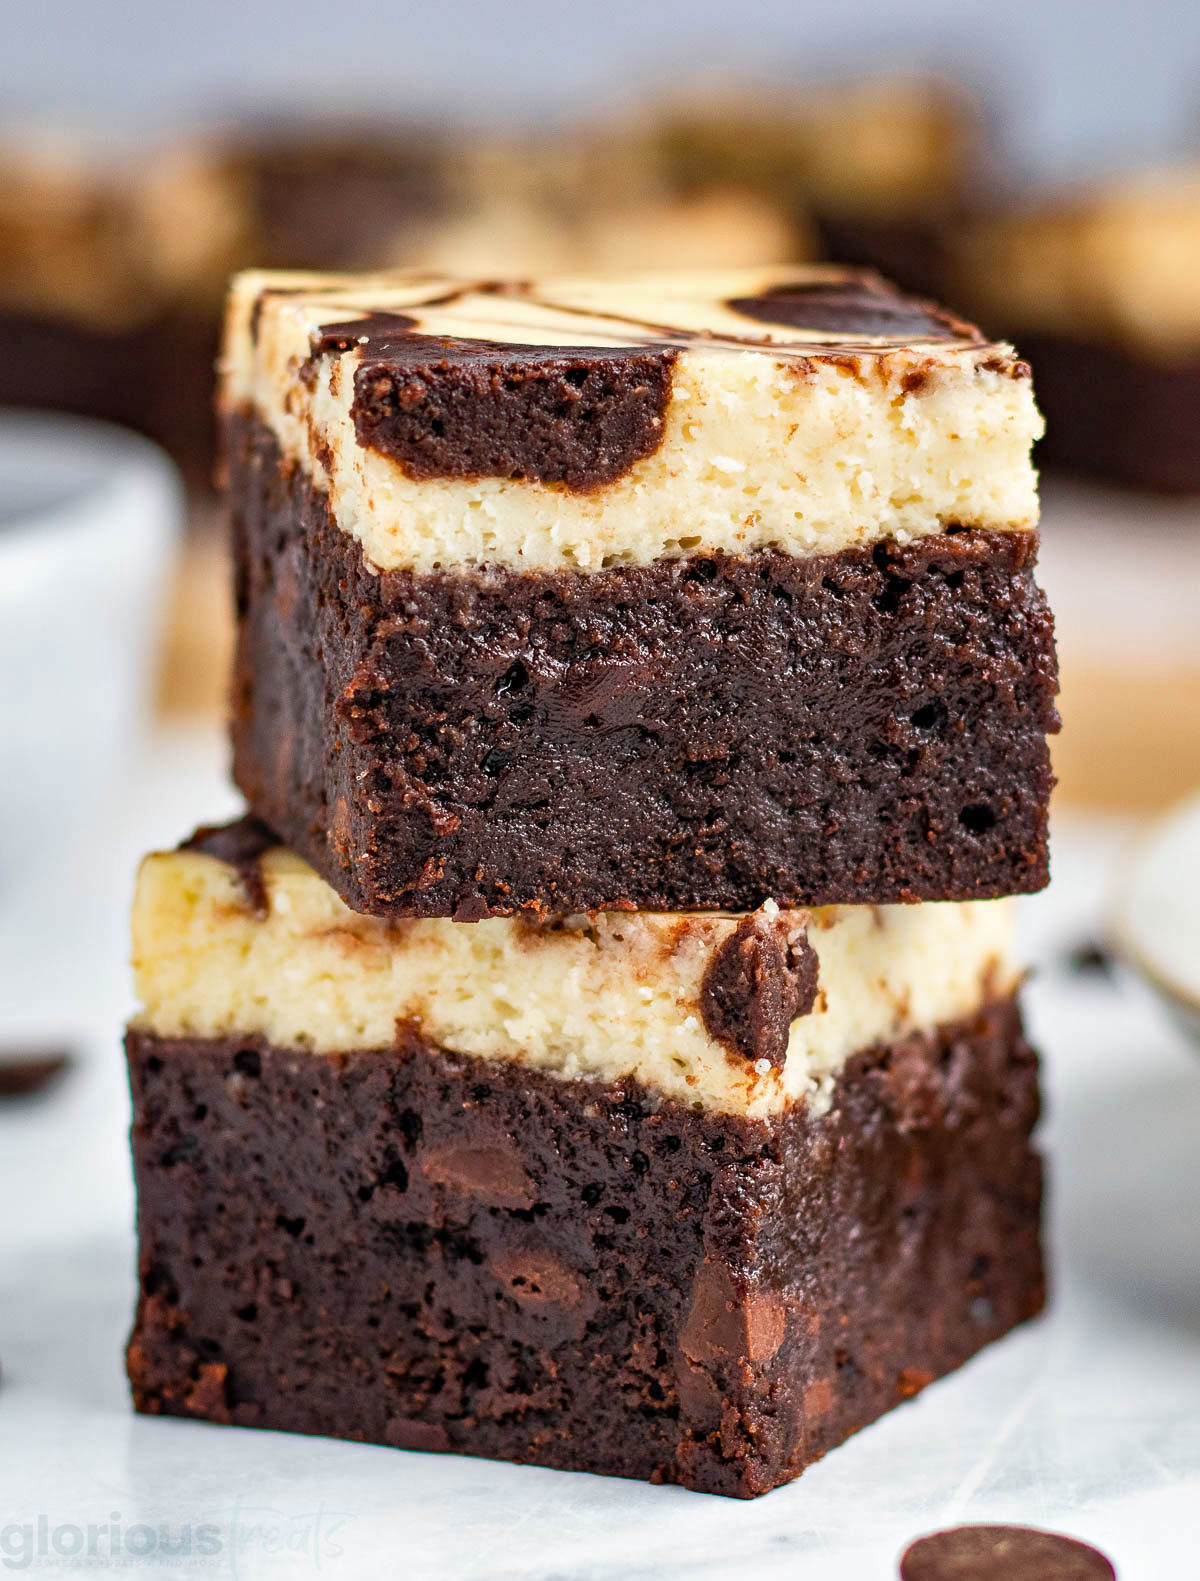 two brownies stacked on top of each other on a small white plate. more brownies can be seen in the background.